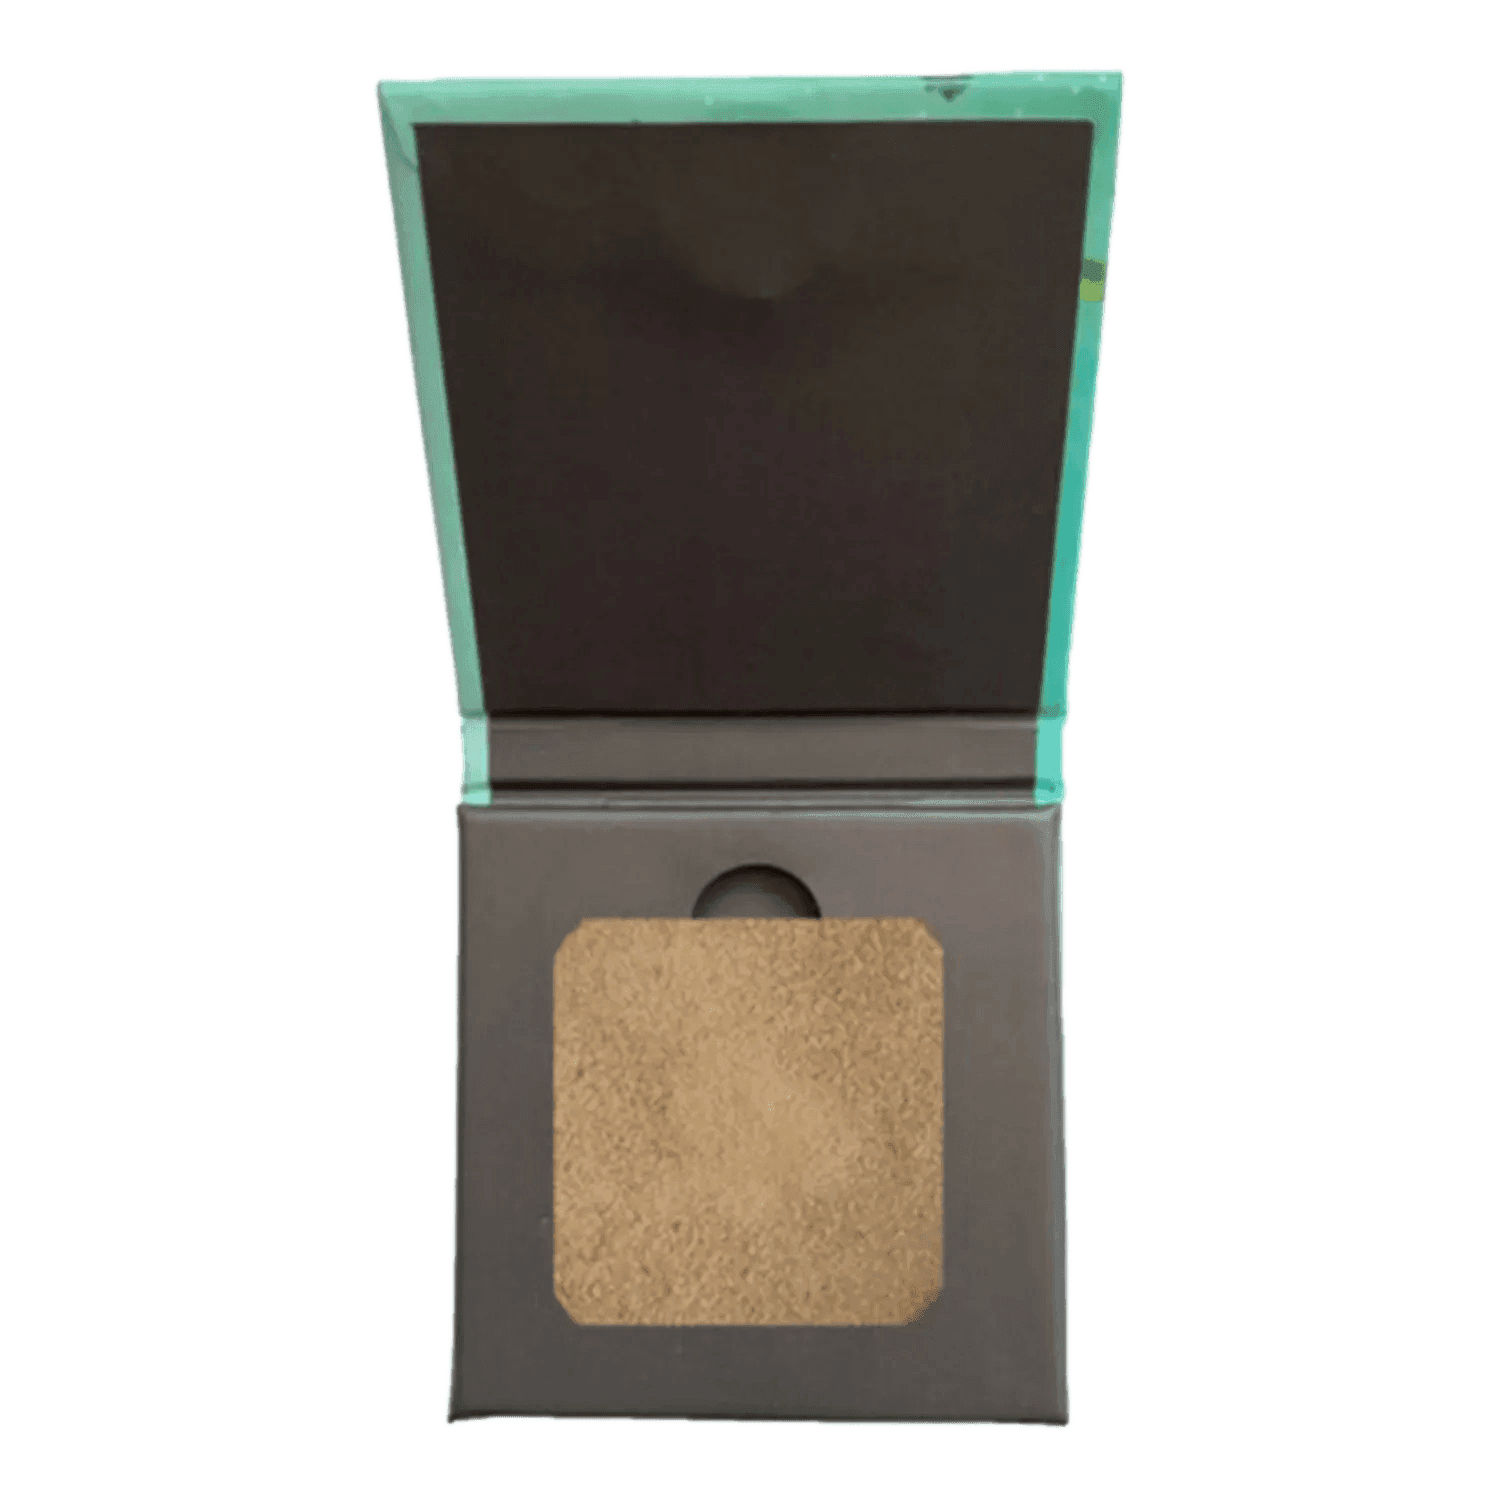 DISGUISE Satin Smooth Eyeshadow Squares - 202 Frosted Gold Melon (4.5g)